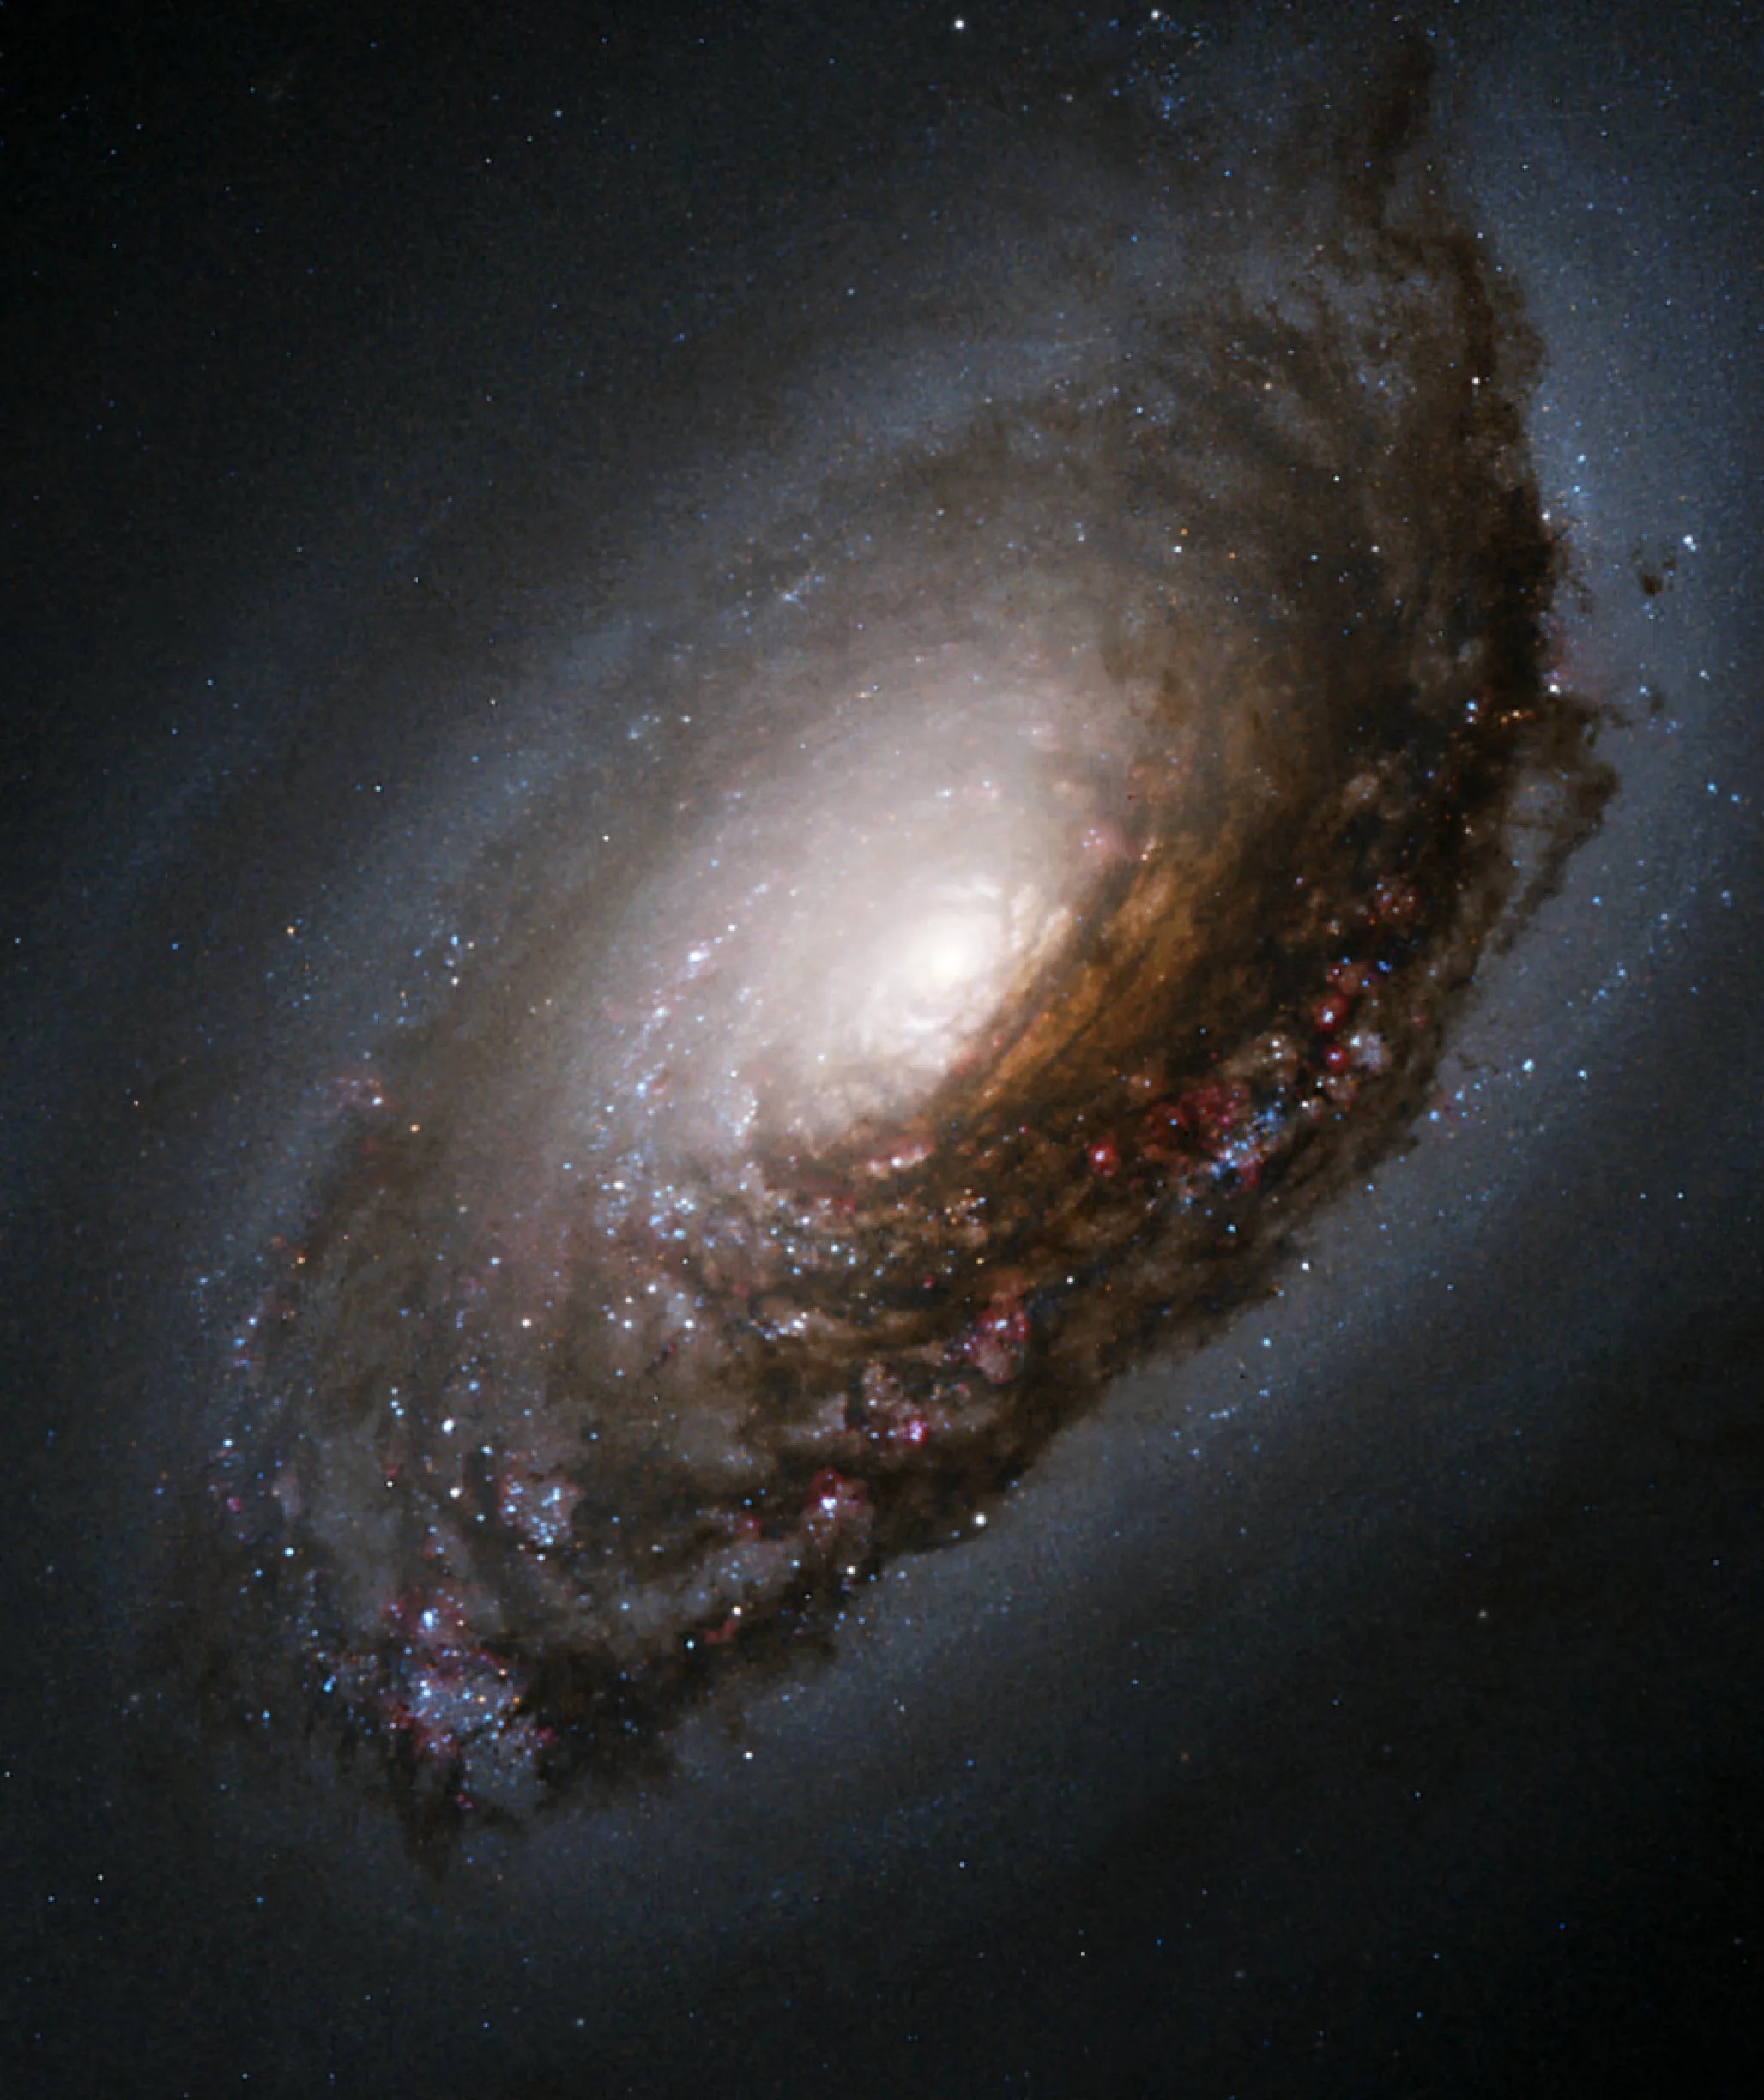 A spiral galaxy fills the image. Dark spiral arms dotted with brown dust and pinkish bursts of stars surround a bright core.